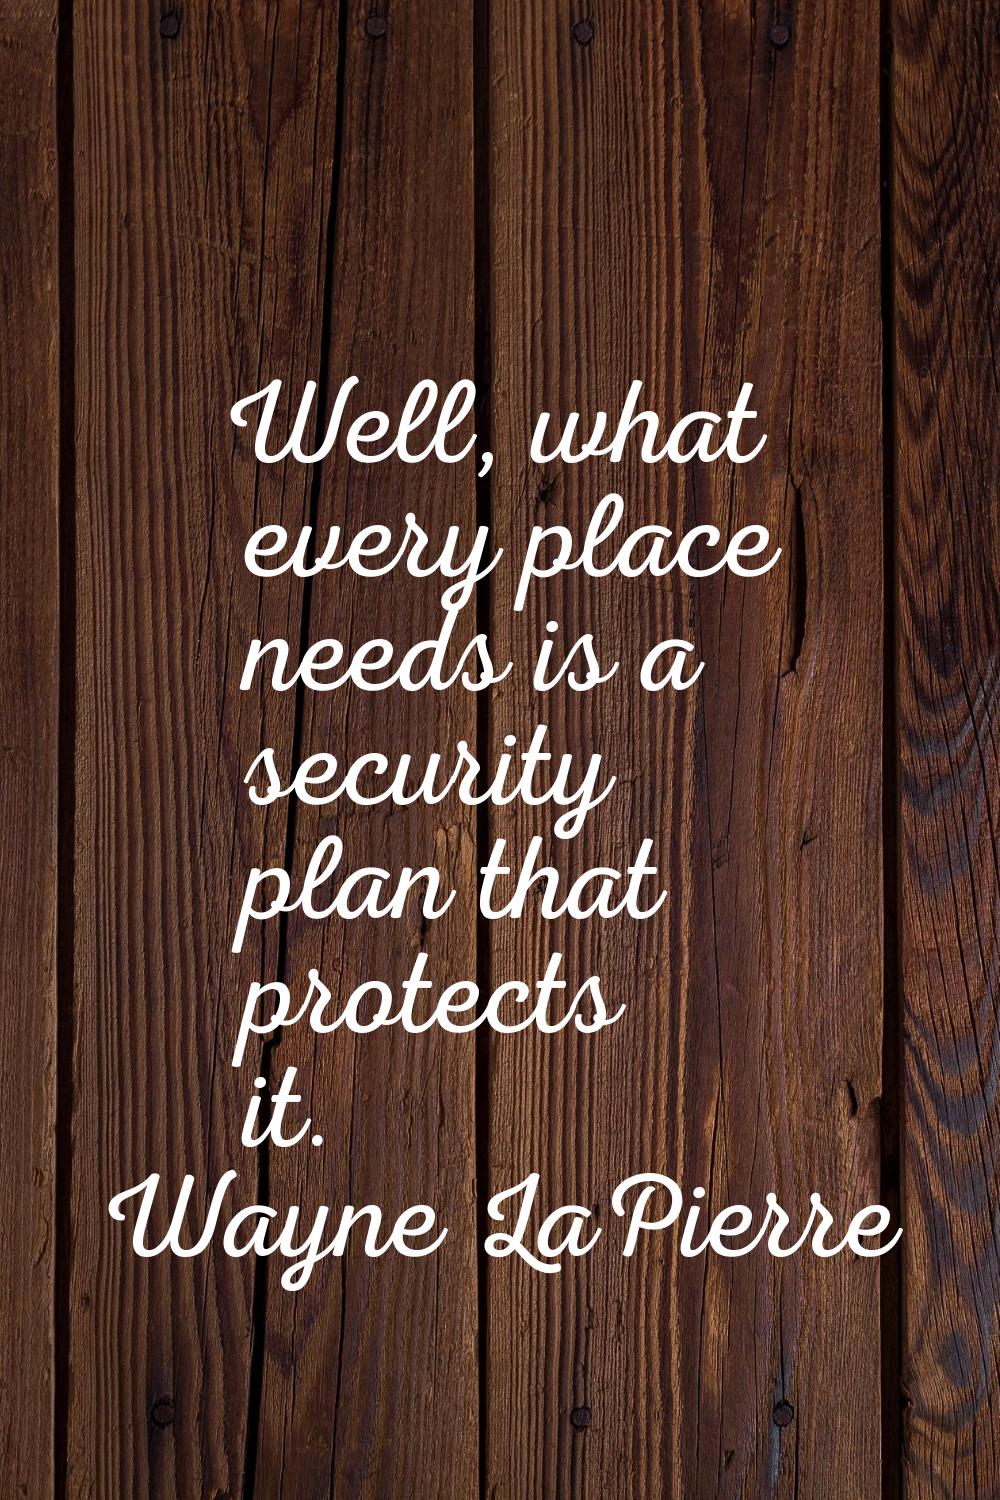 Well, what every place needs is a security plan that protects it.